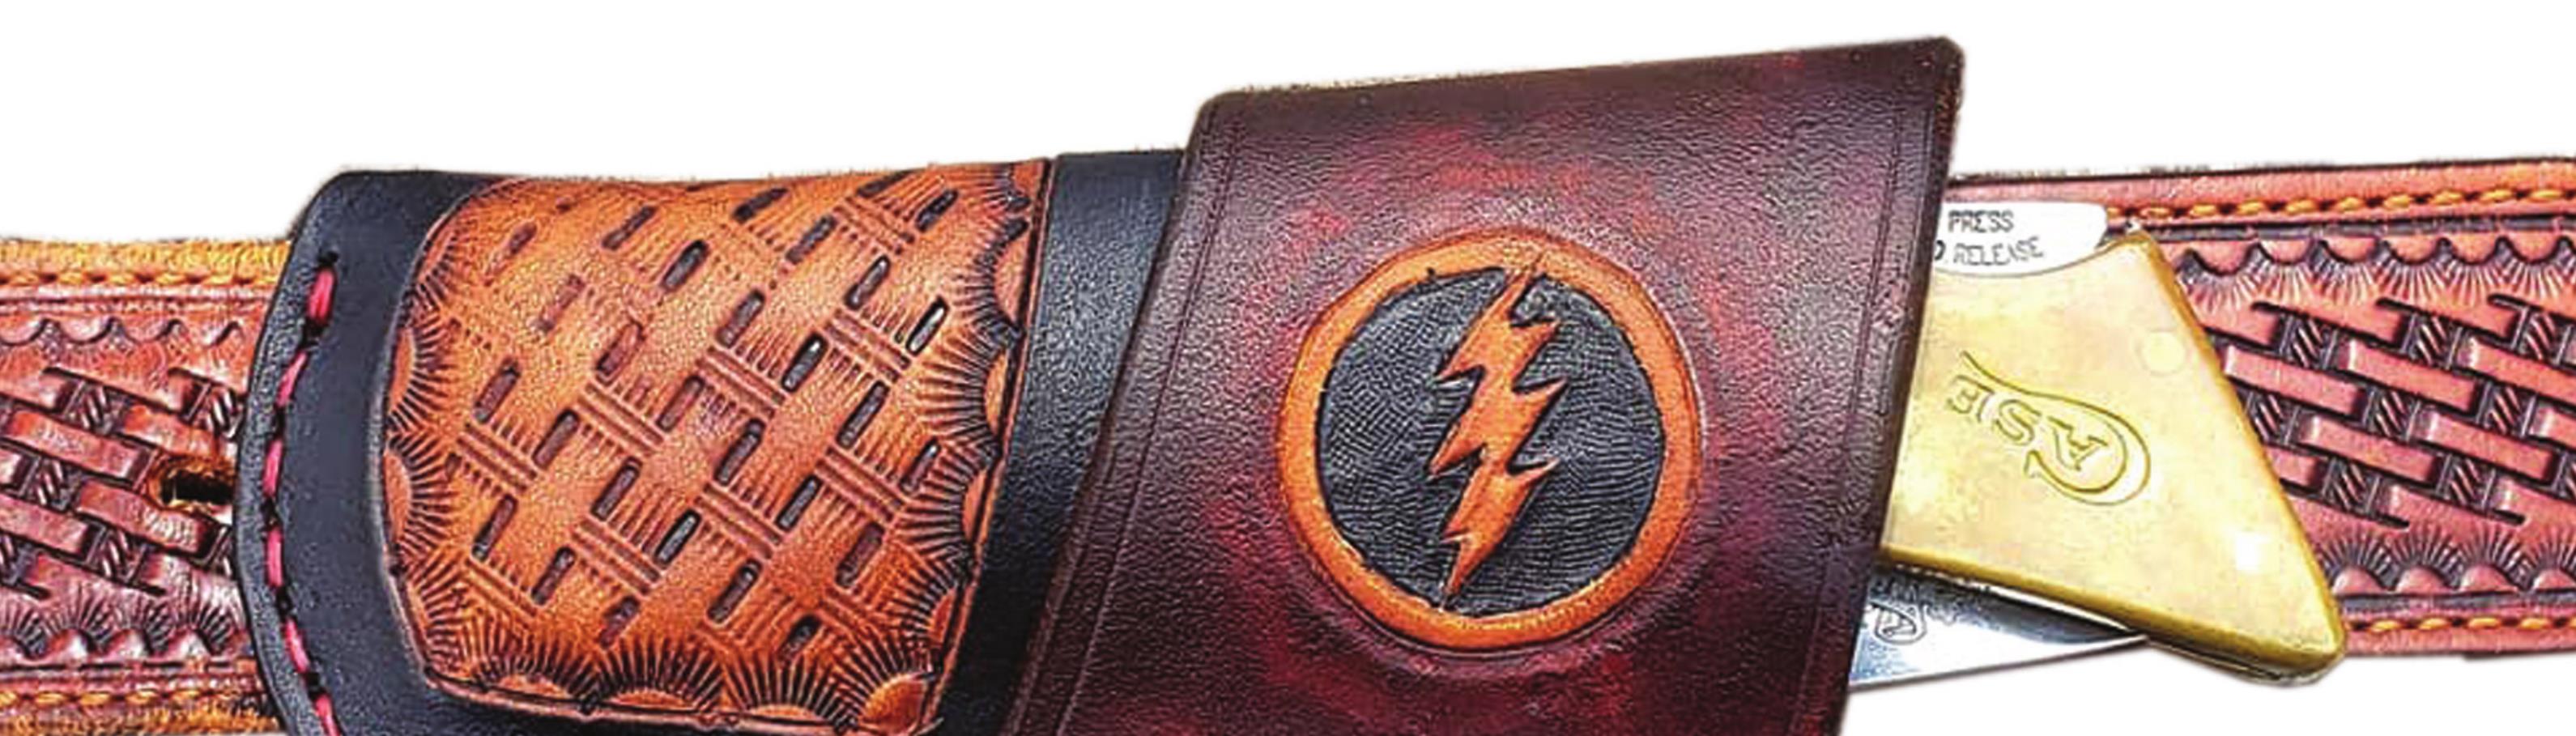 Provided This hand-stitched knife holster made by Mac McCune features a flash design.